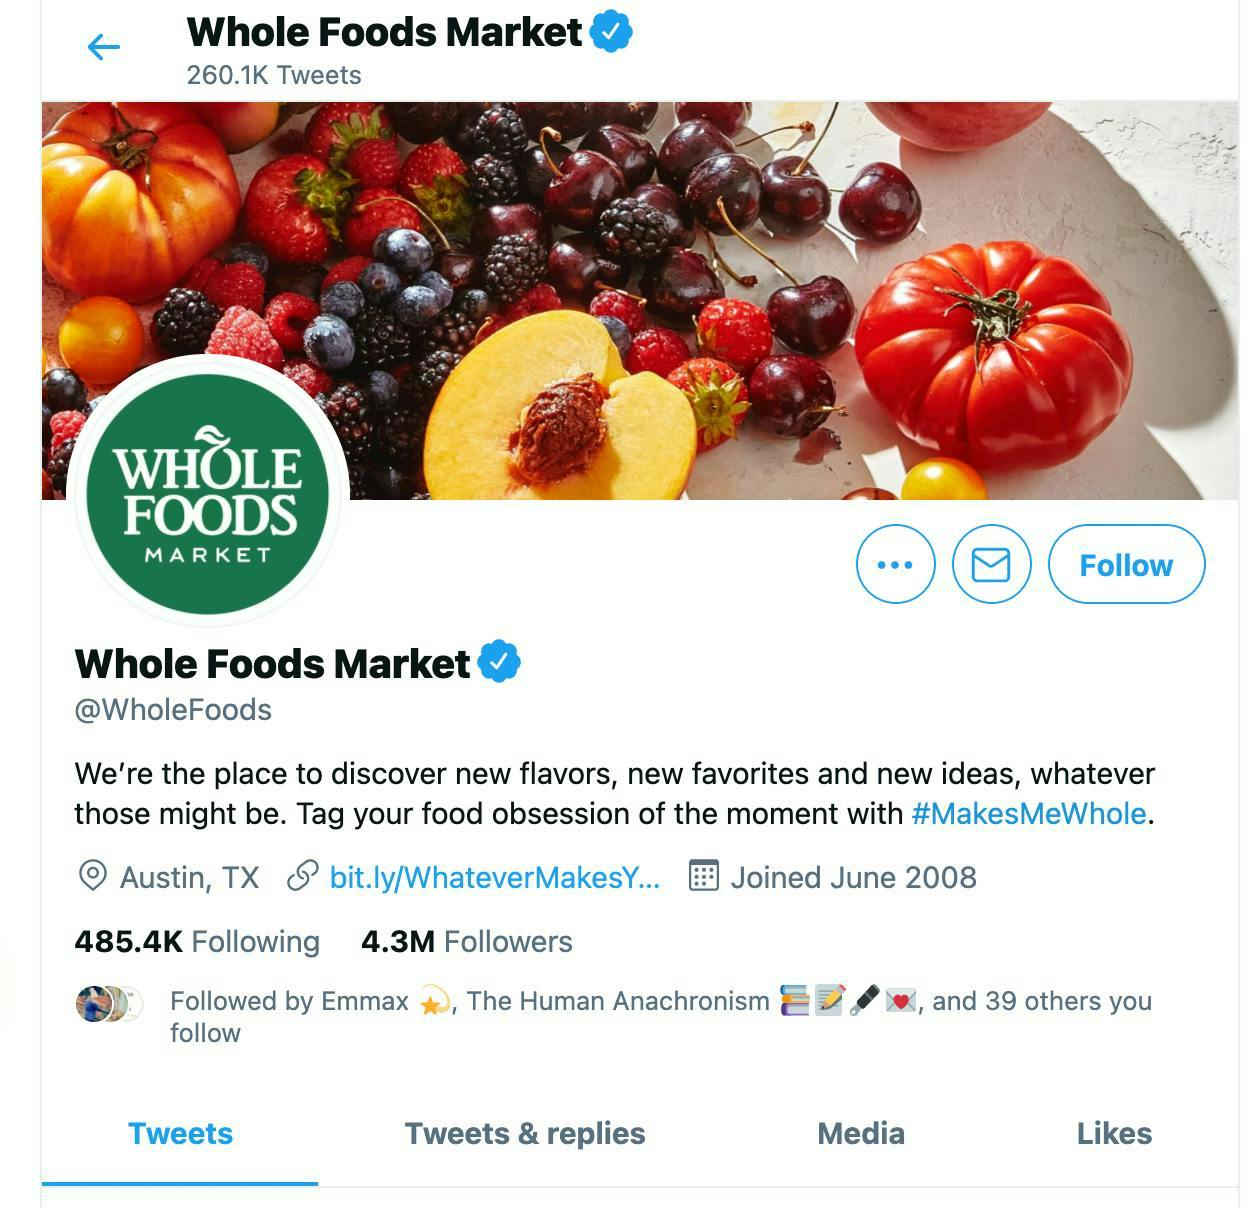 Twitter profile of Whole Foods, showing a branded hashtag in the bio